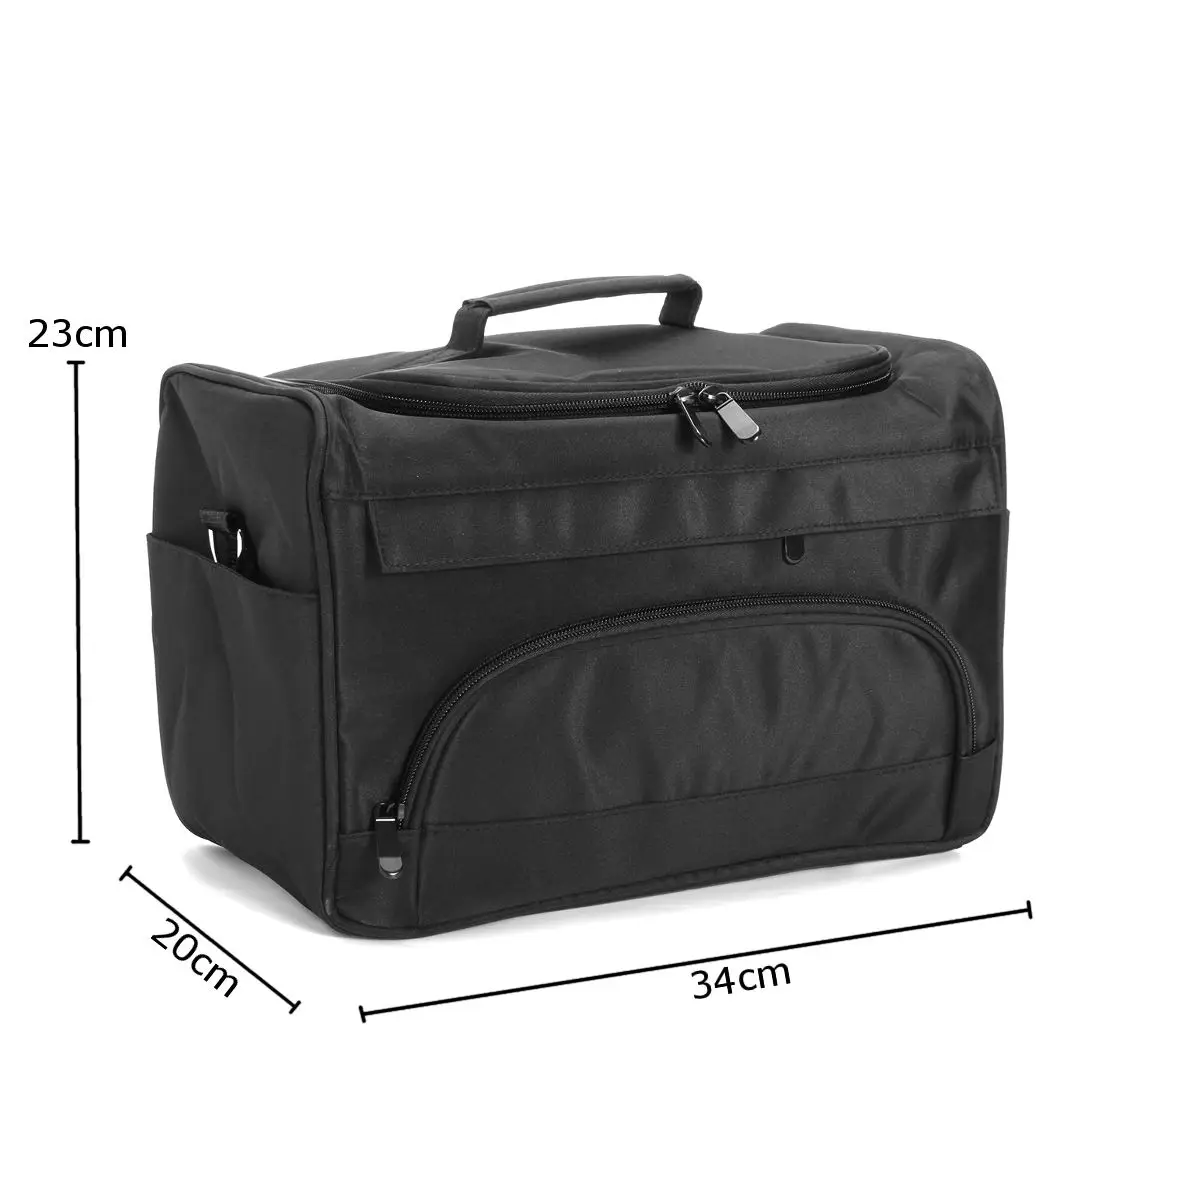 Professional Organizer Case High Quality Multilayer Clapboard Bag Large Capacity Storage Bag Suitcases